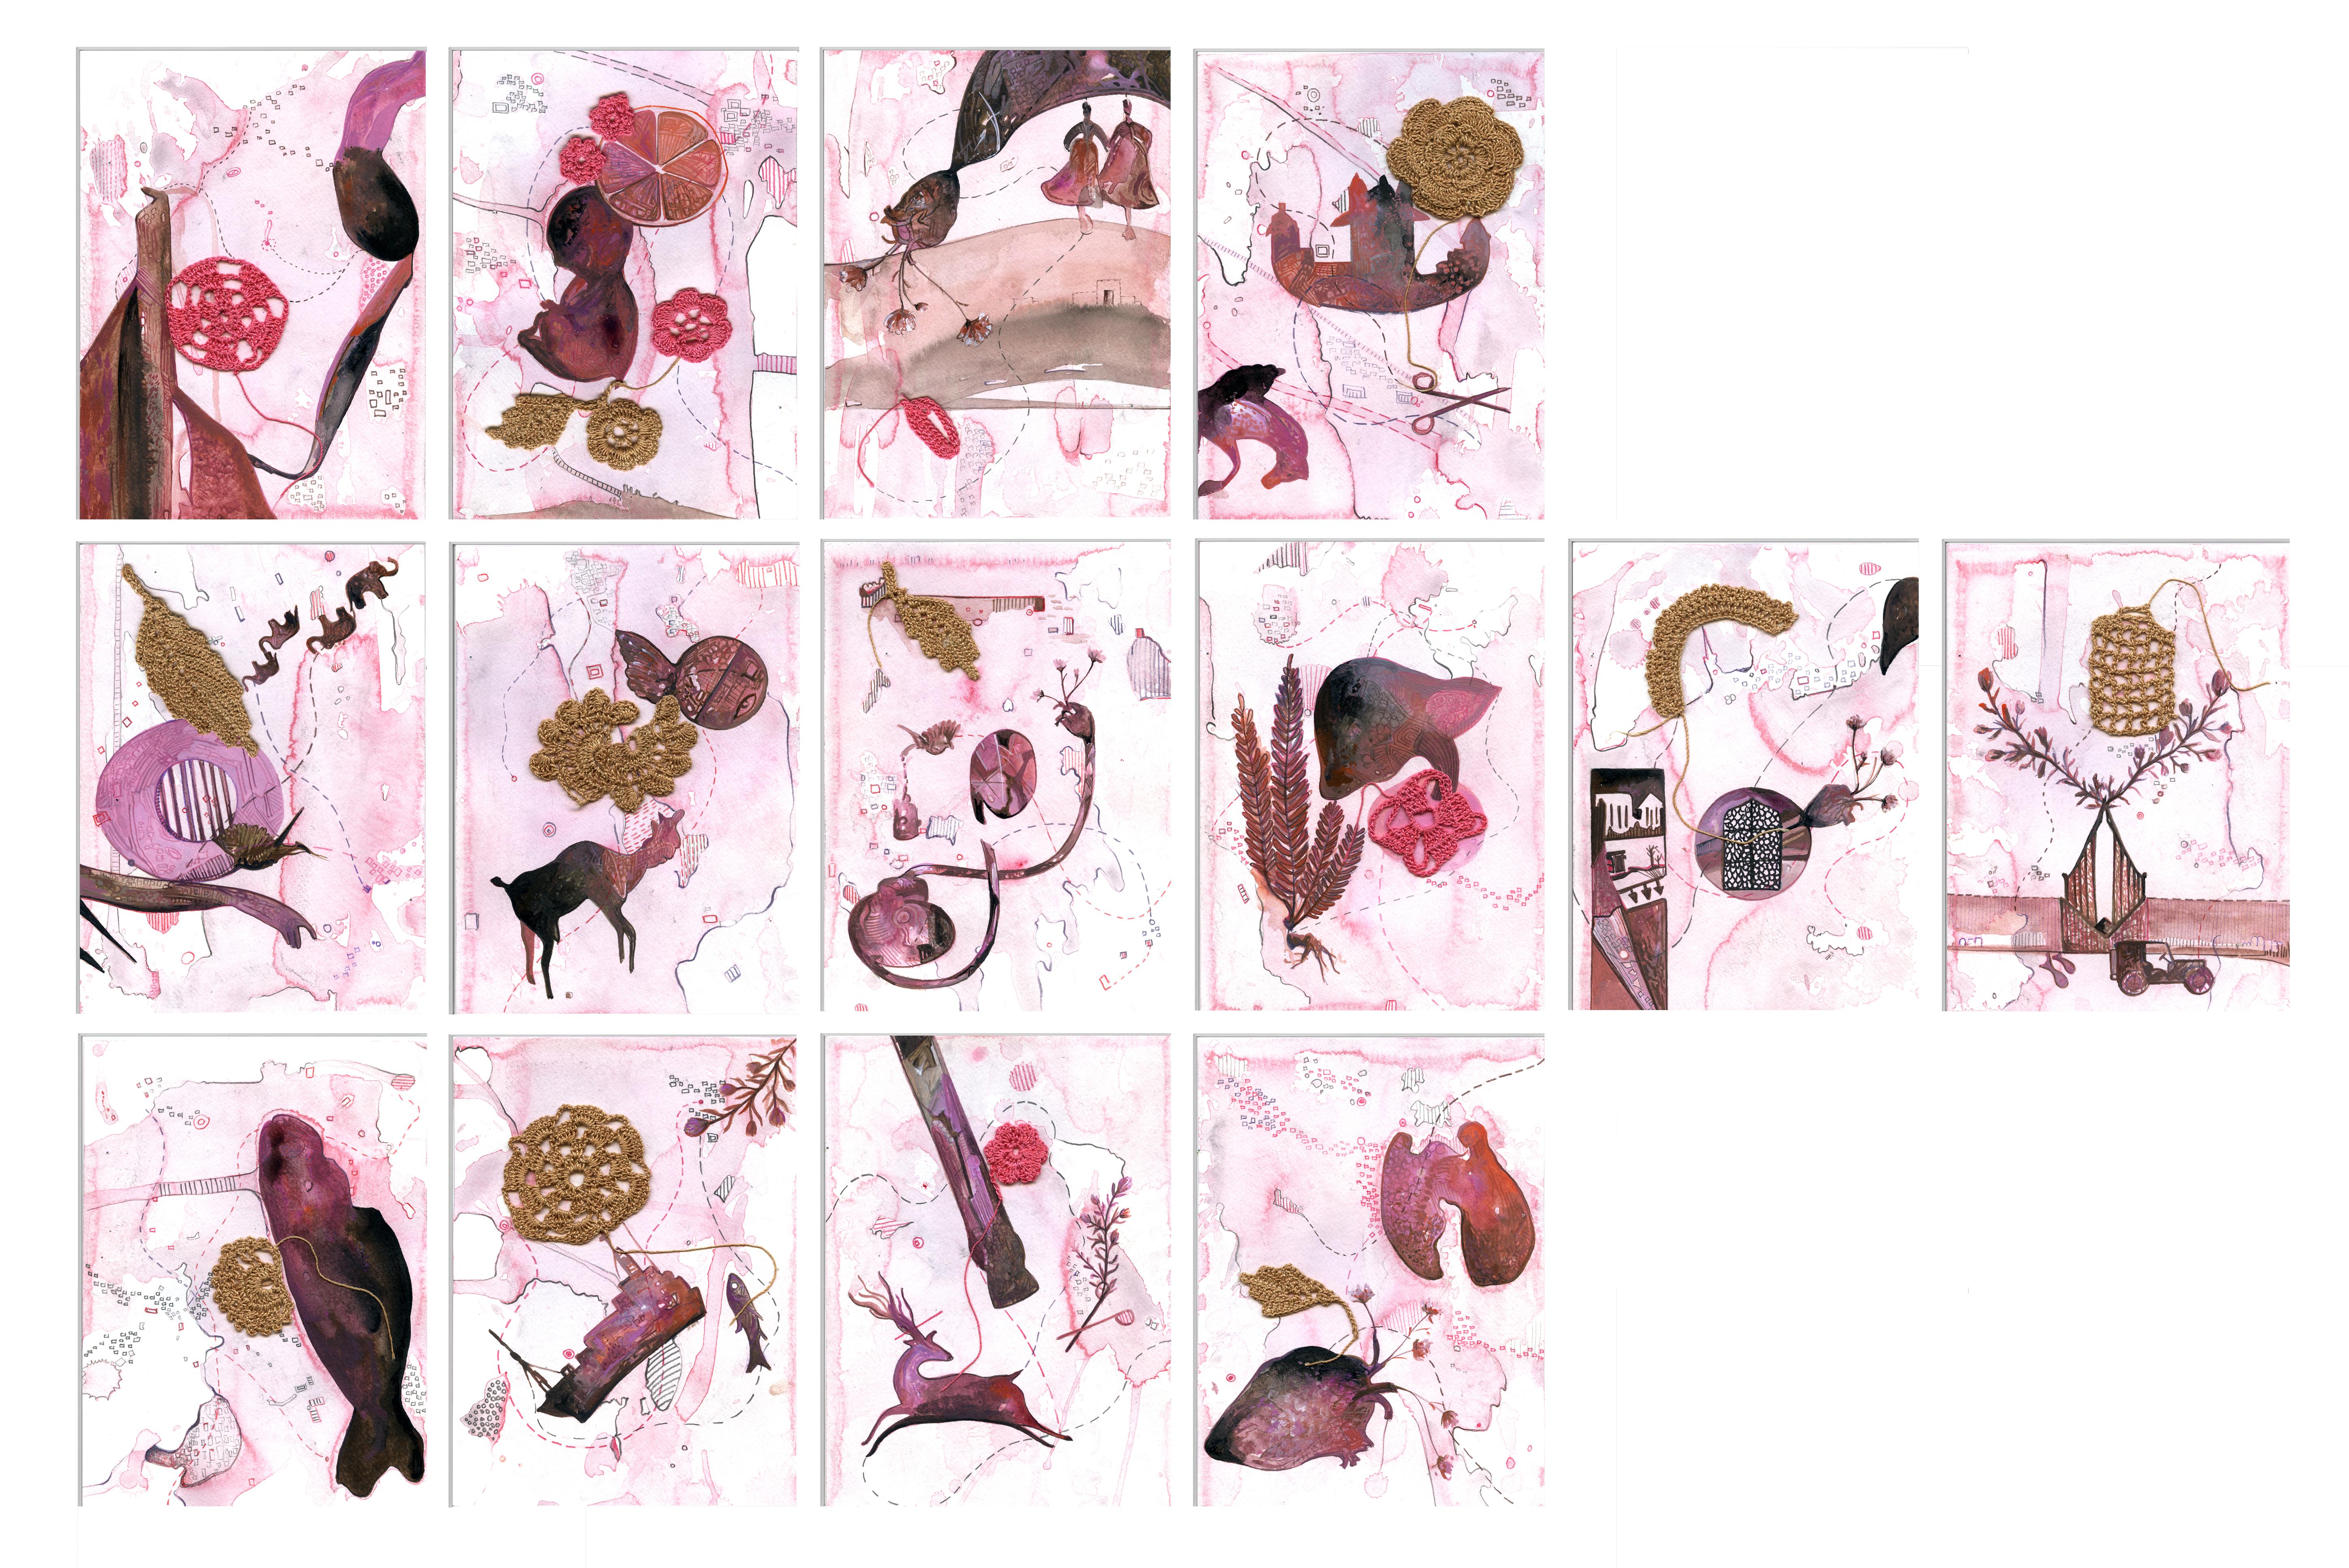 Birth Healing -  14 panel Pink, Red, and Grey Painting by Indian Artist  1